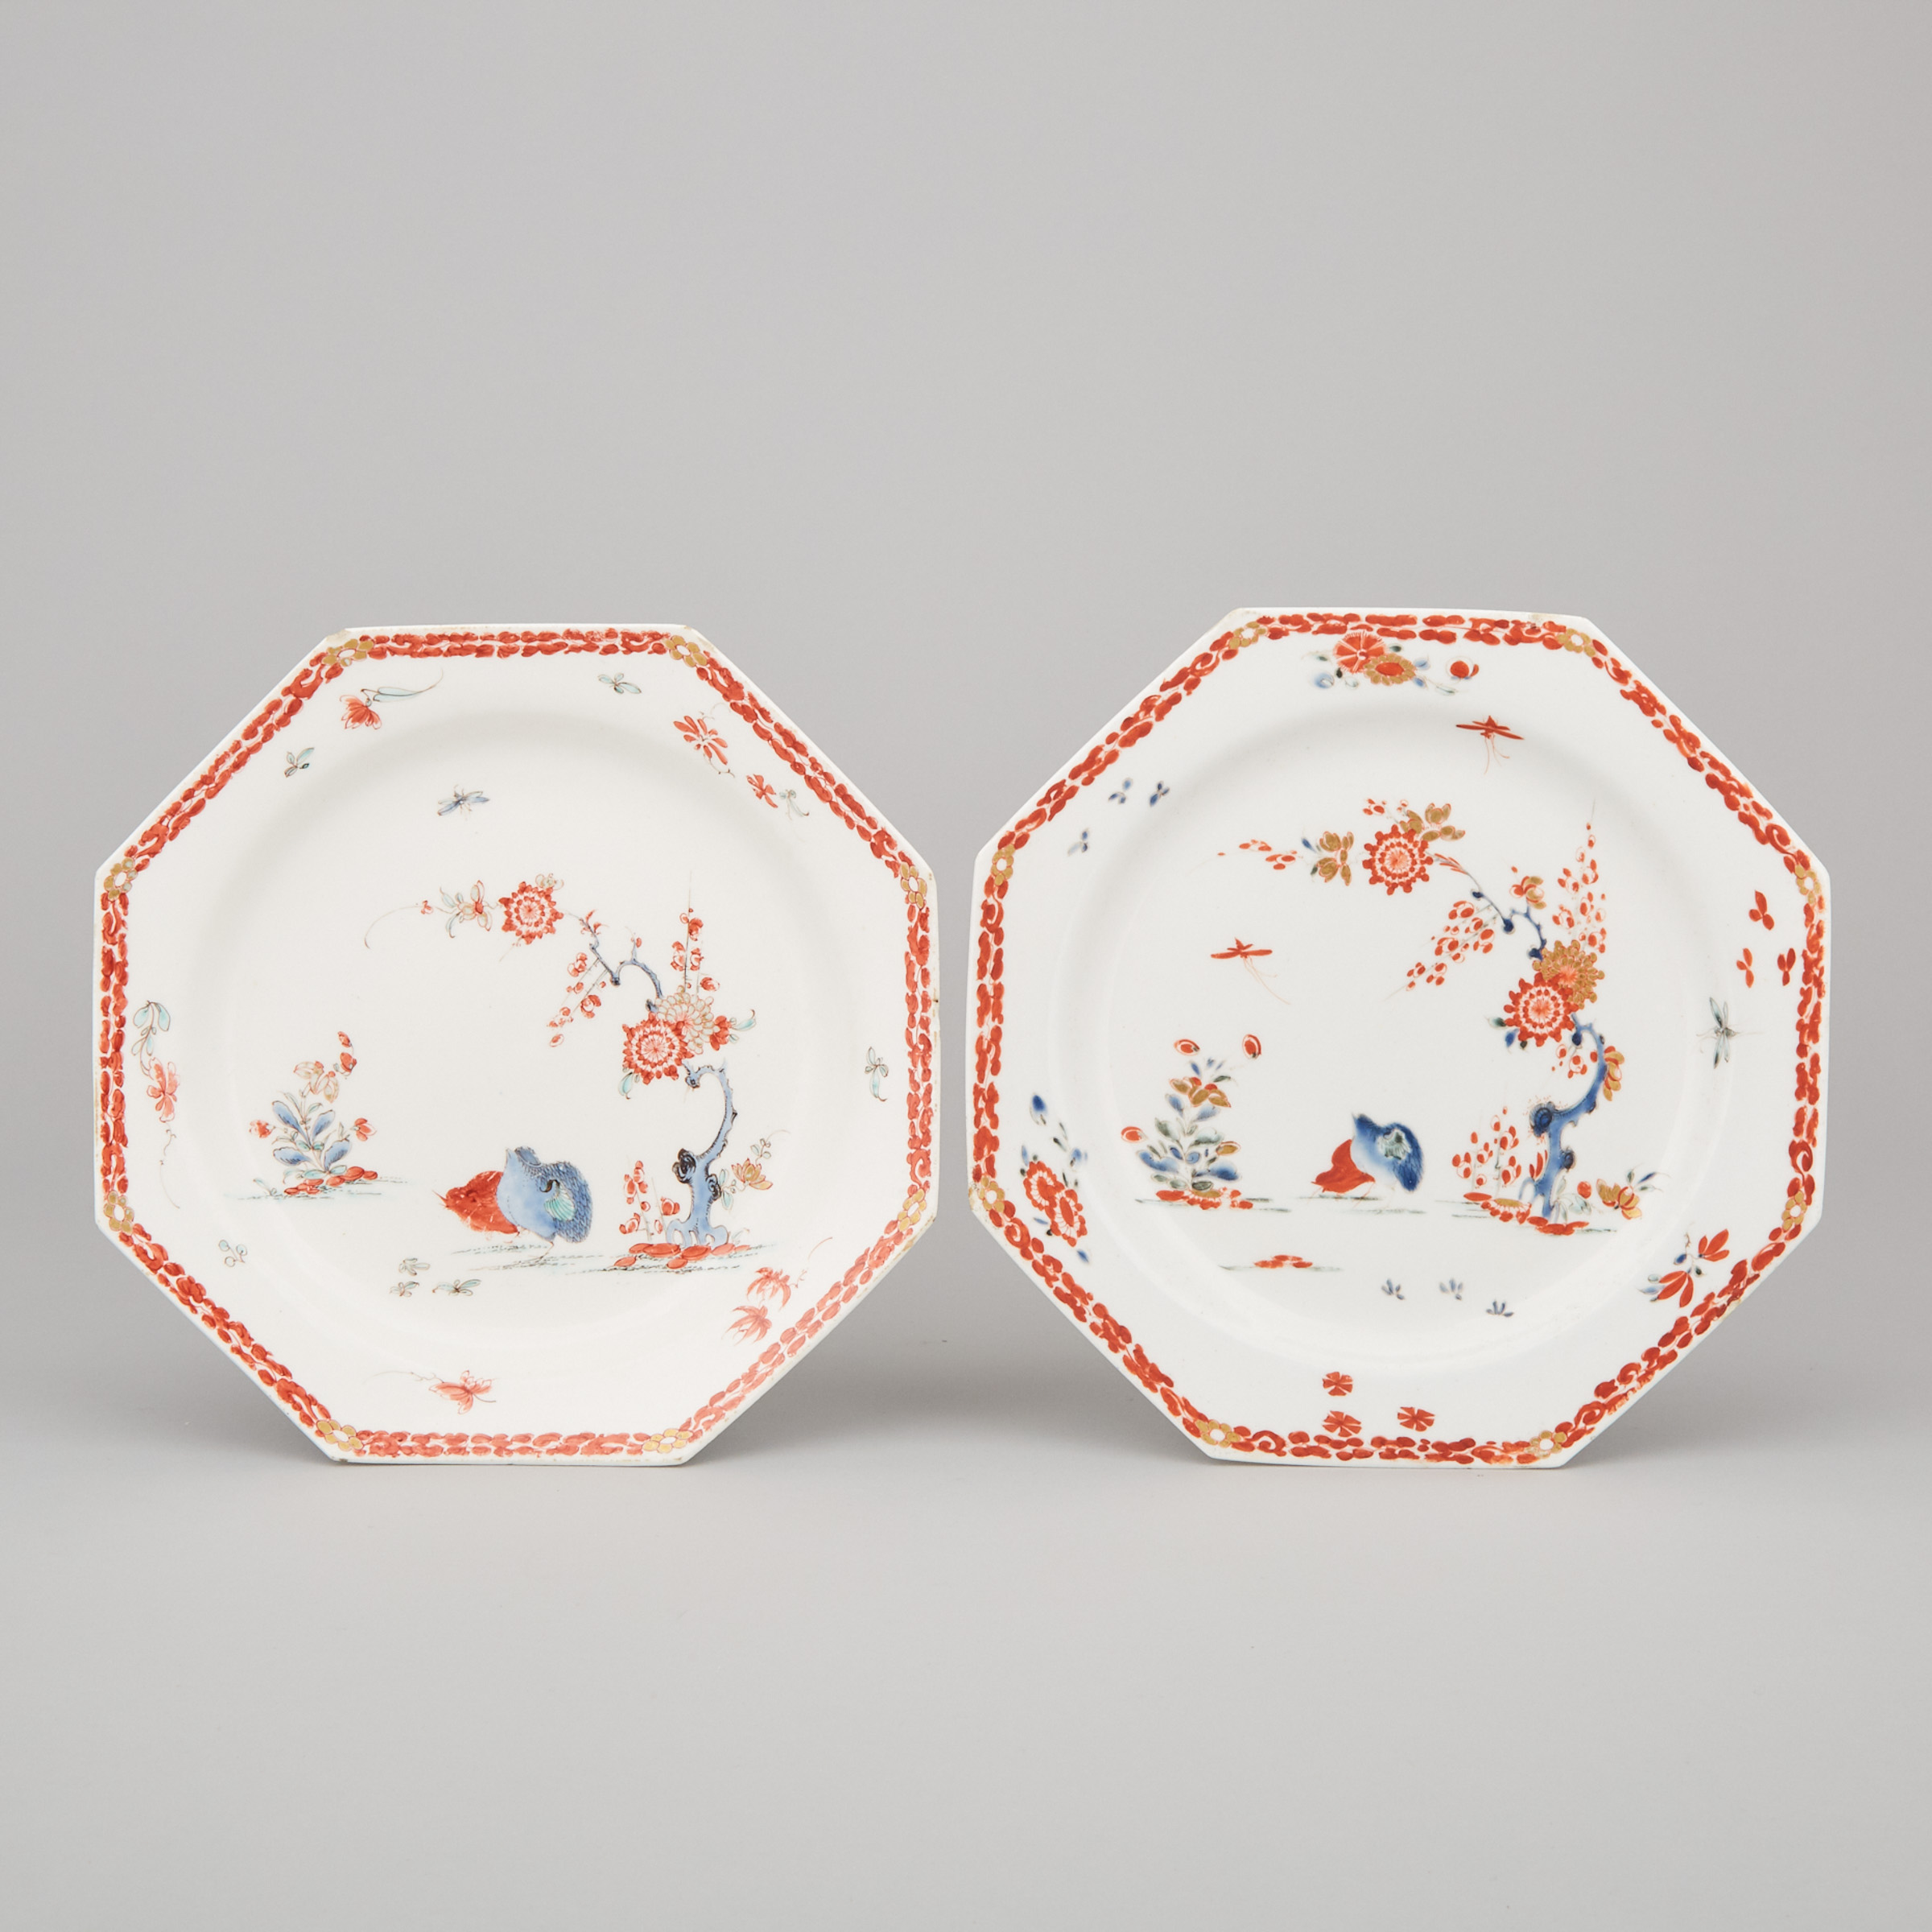 Pair of Bow Kakiemon 'Two Quail' Pattern Octagonal Dishes, c.1760